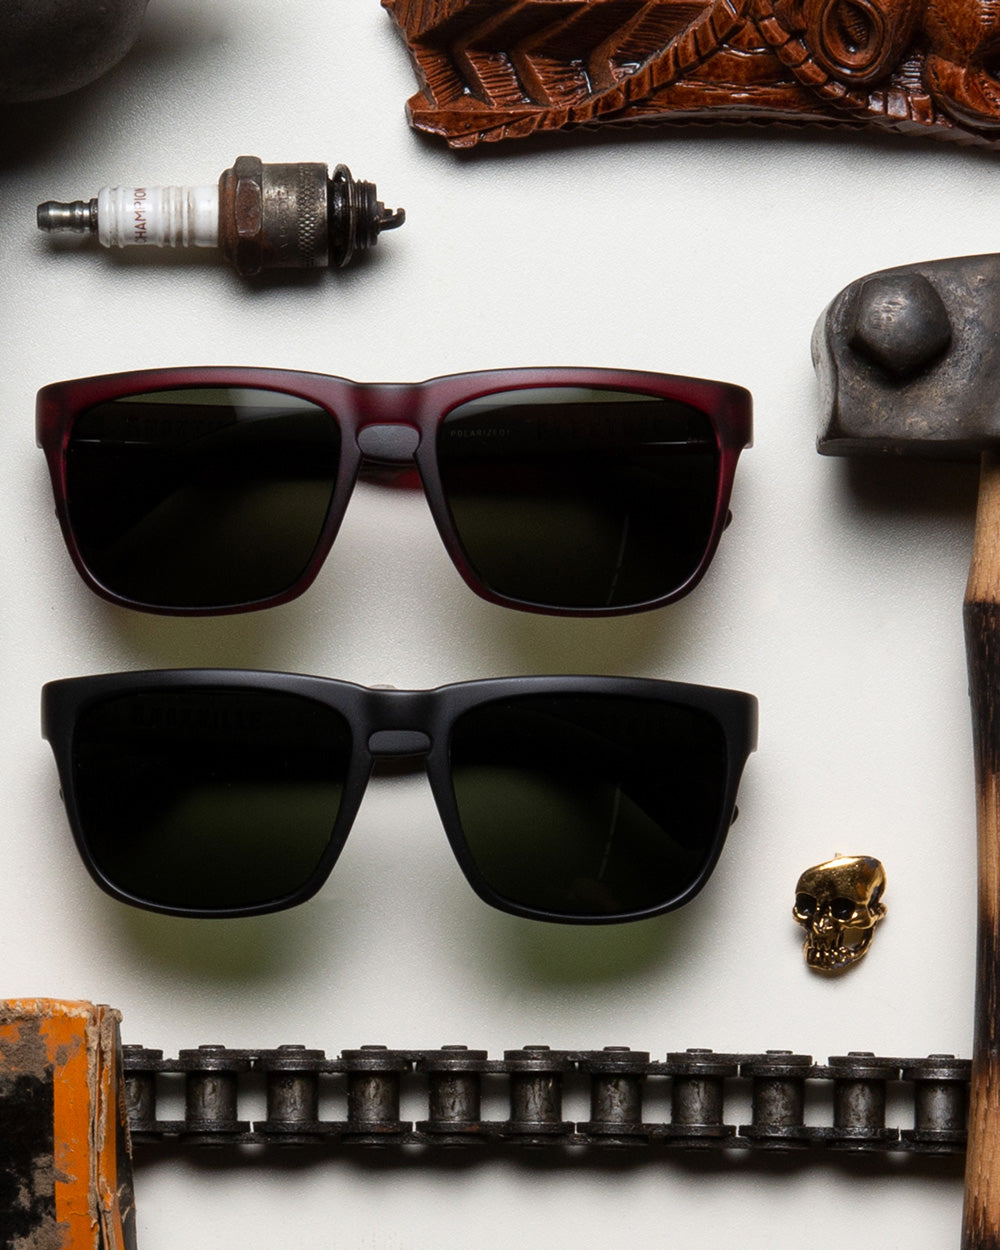 So iLL x On The Roam x Electric sunglasses by jason momoa shown with other motorcycle accessories